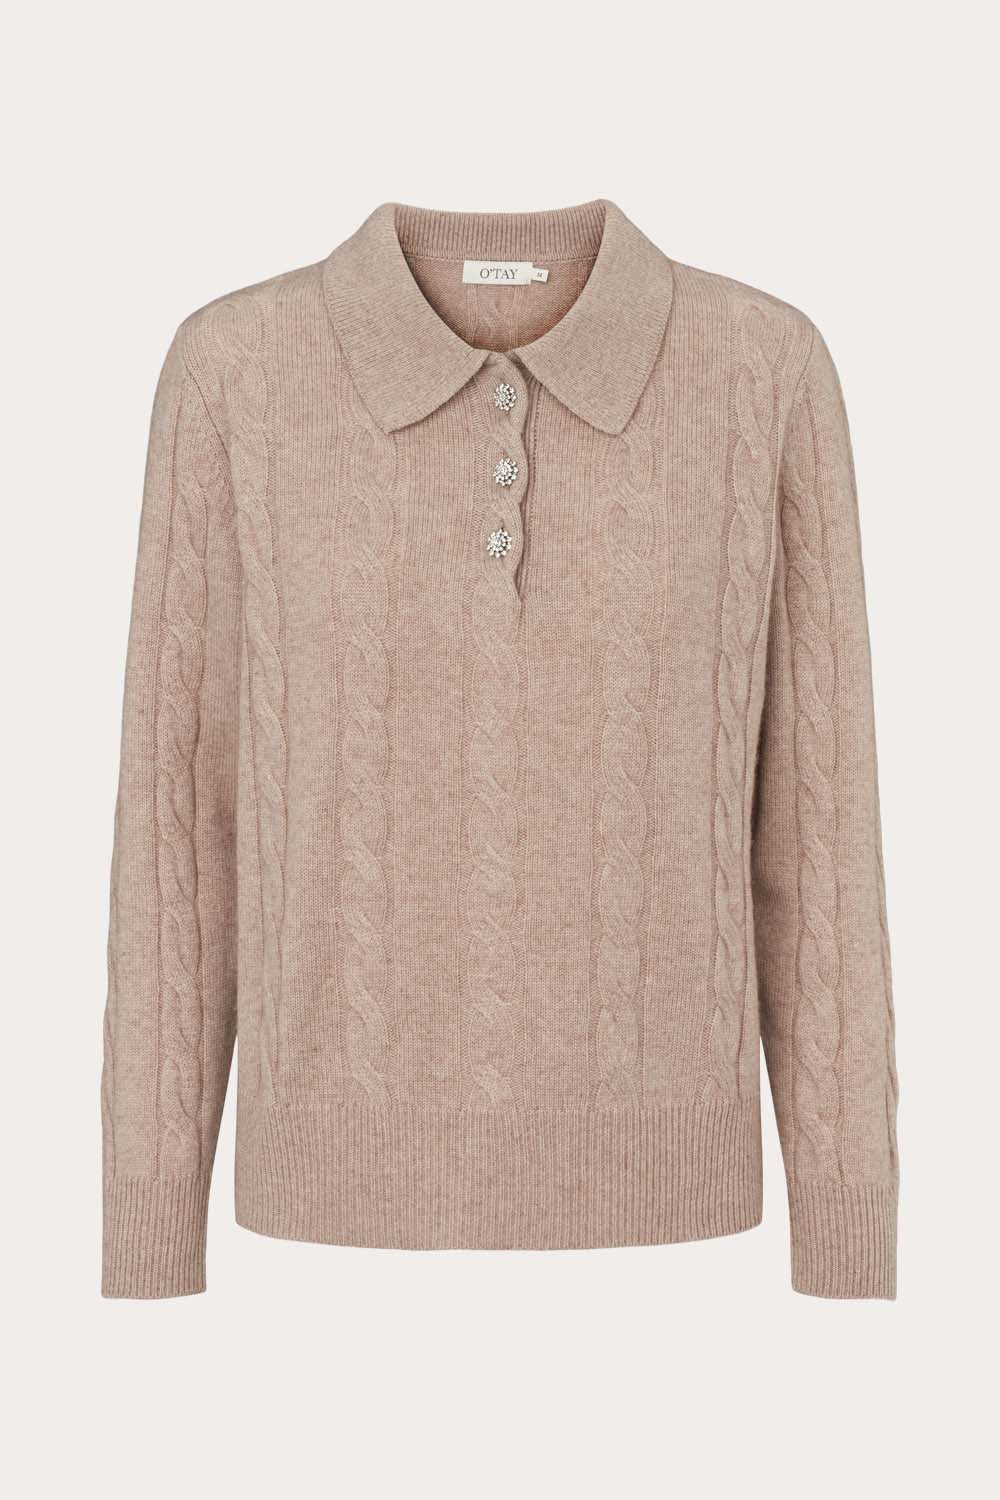 O&#39;TAY Dolly Sweater Bluser Ludlow